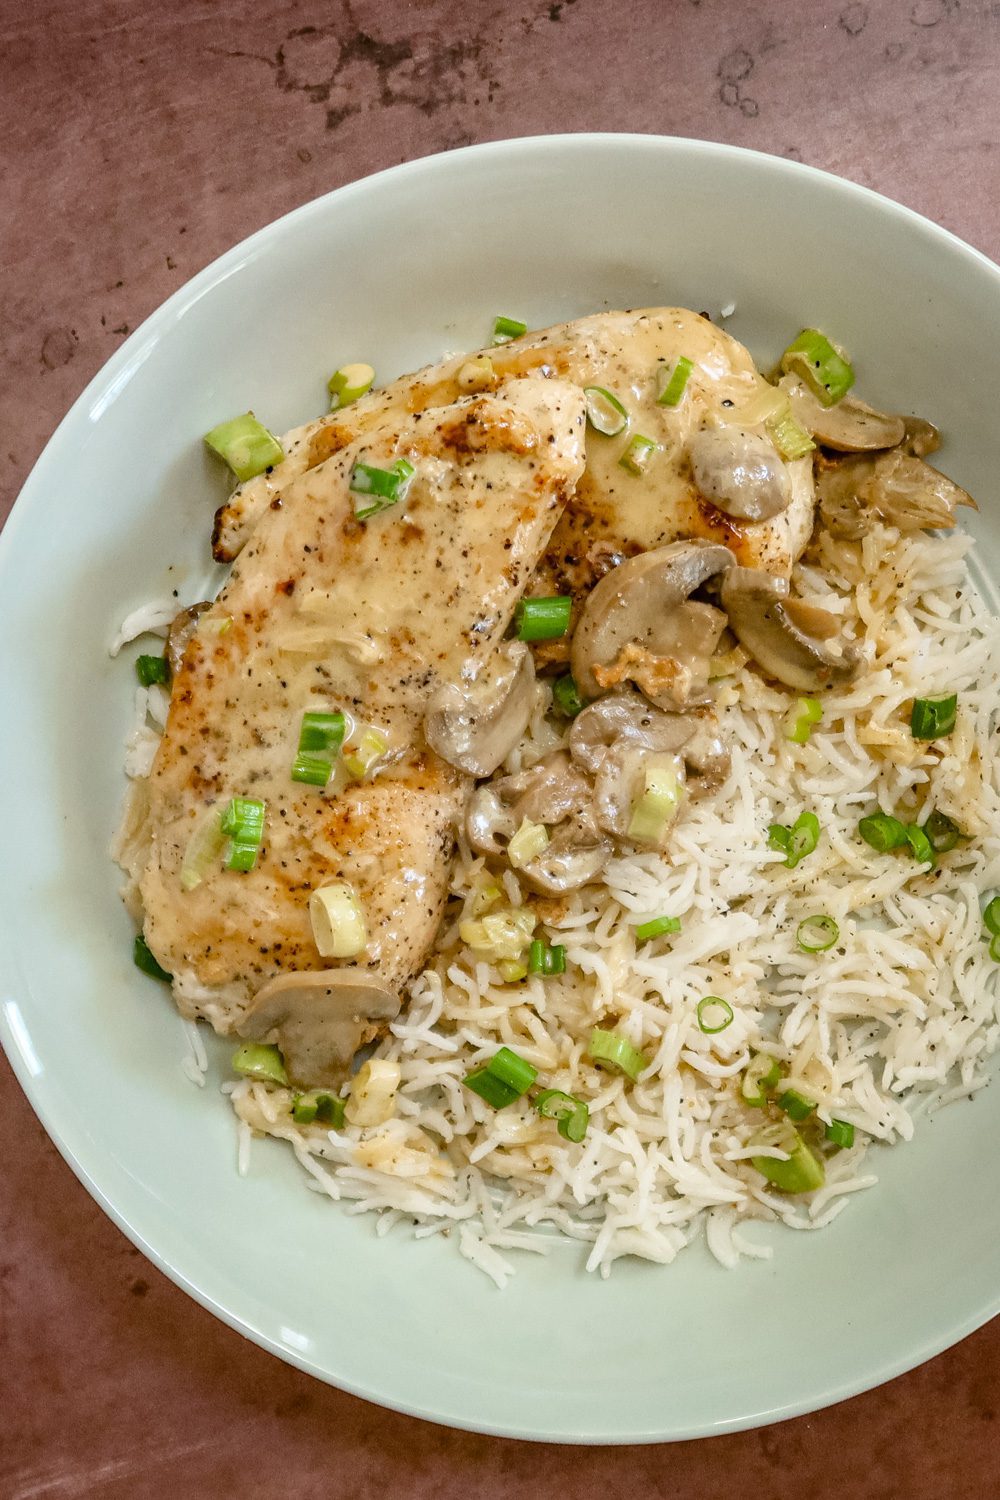 apple brandy chicken on a bed of rice with mushrooms and green onions